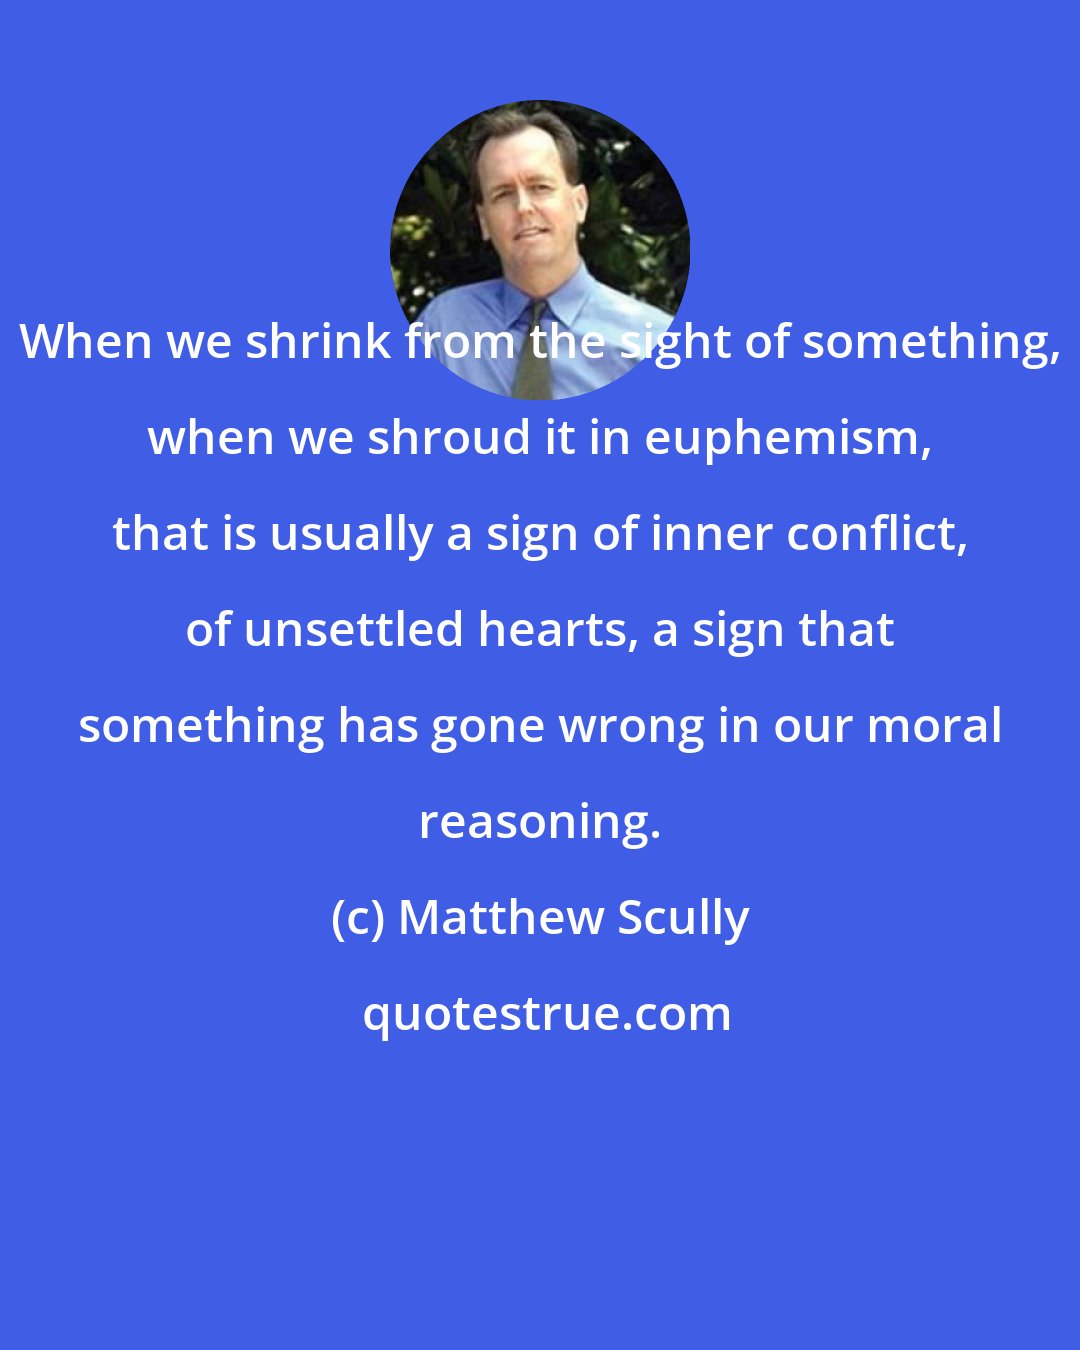 Matthew Scully: When we shrink from the sight of something, when we shroud it in euphemism, that is usually a sign of inner conflict, of unsettled hearts, a sign that something has gone wrong in our moral reasoning.